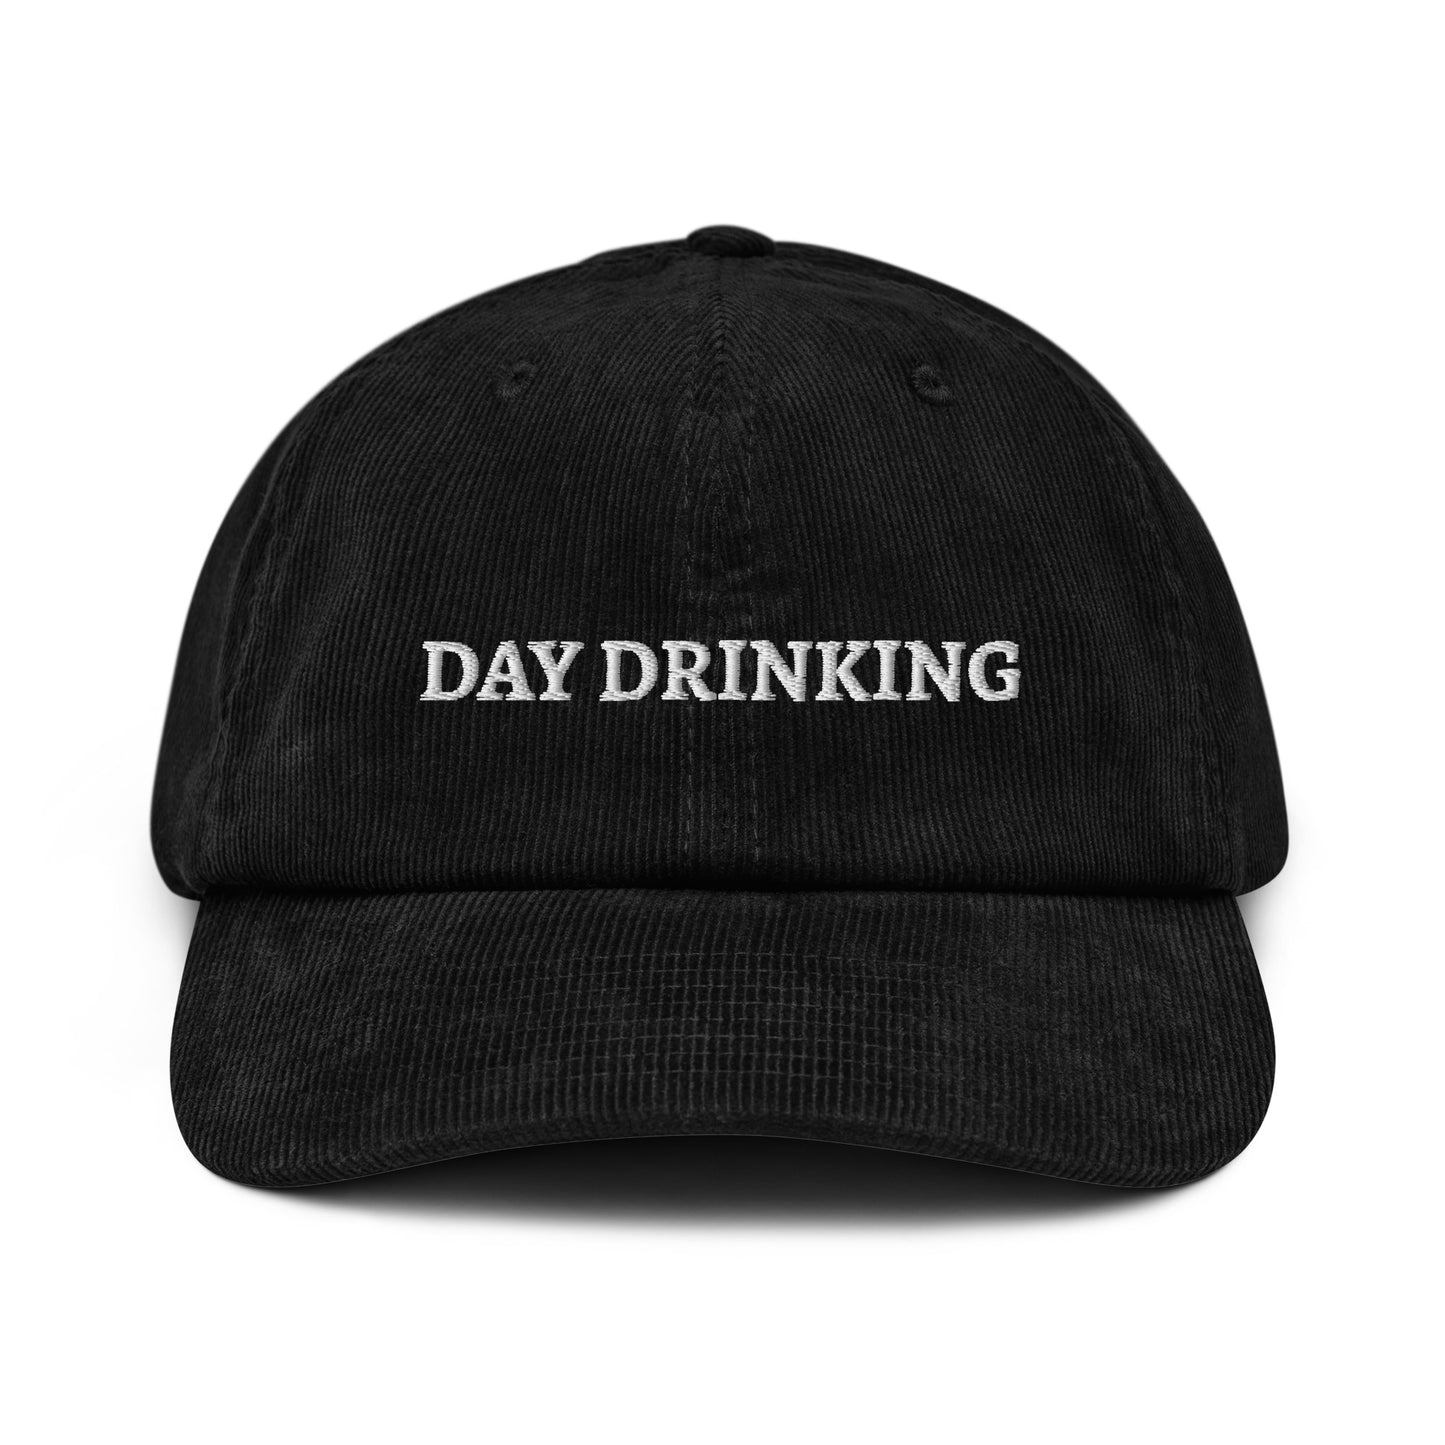 DAY DRINKING Cord-Cap